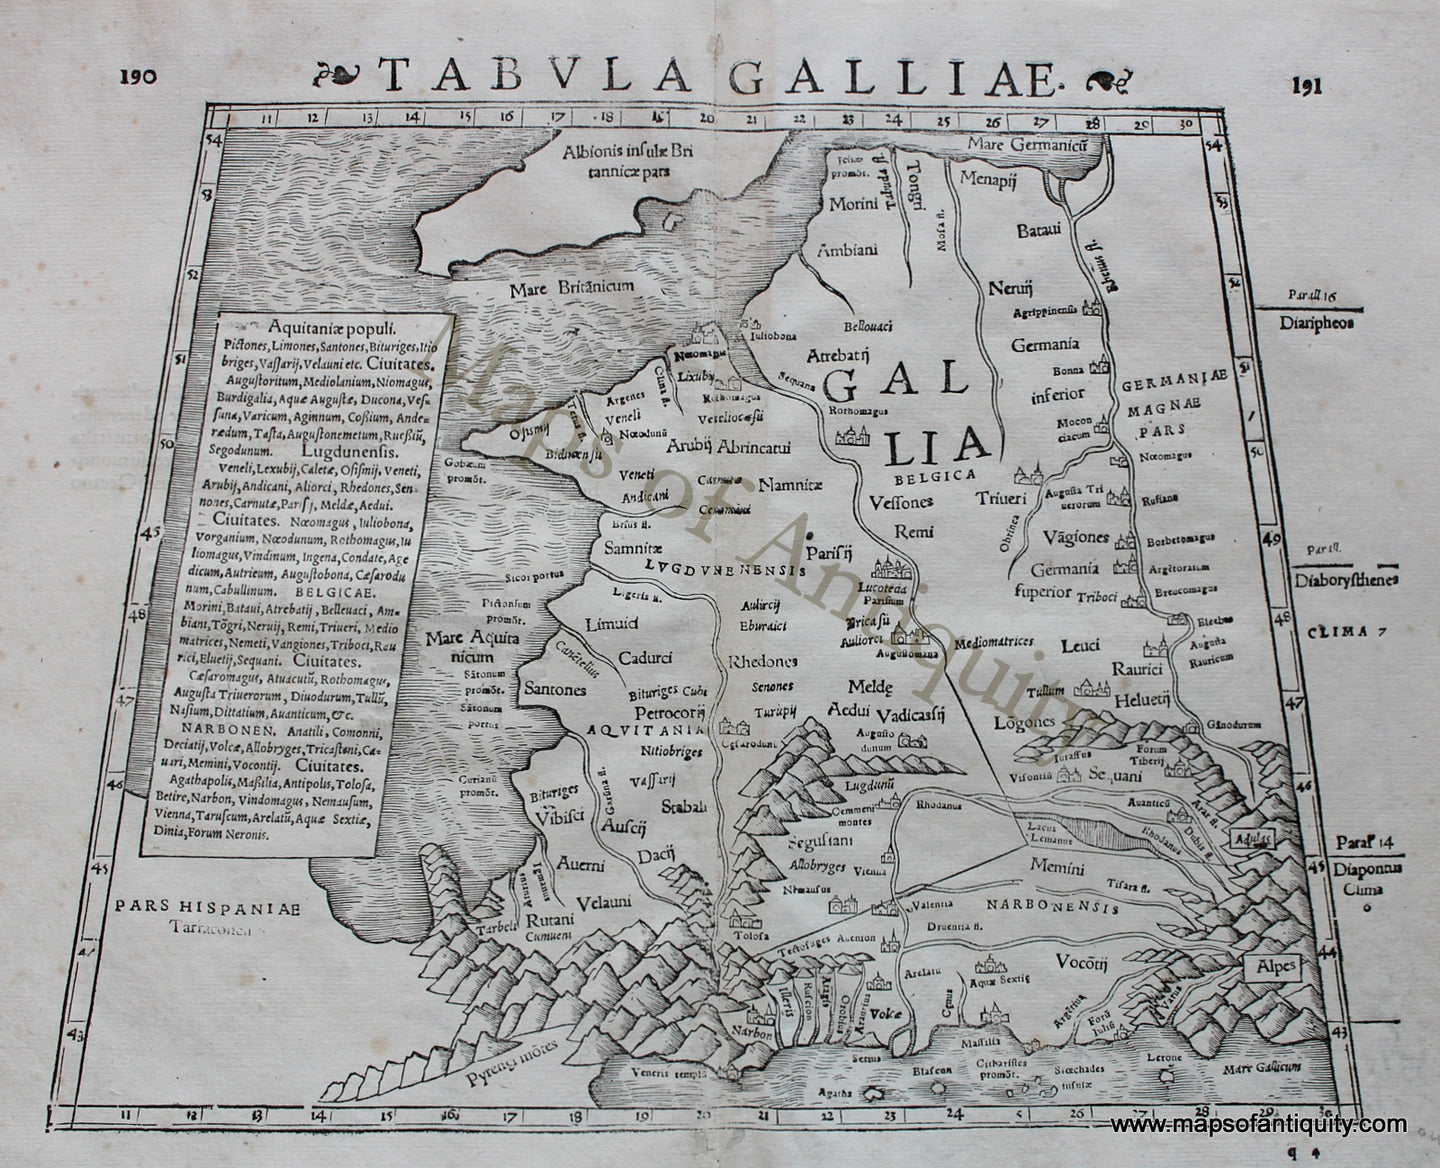 Antique-Black-and-White-Engraved-Map-Tabula-Galliae-France-Europe-France-1542-Munster-Maps-Of-Antiquity